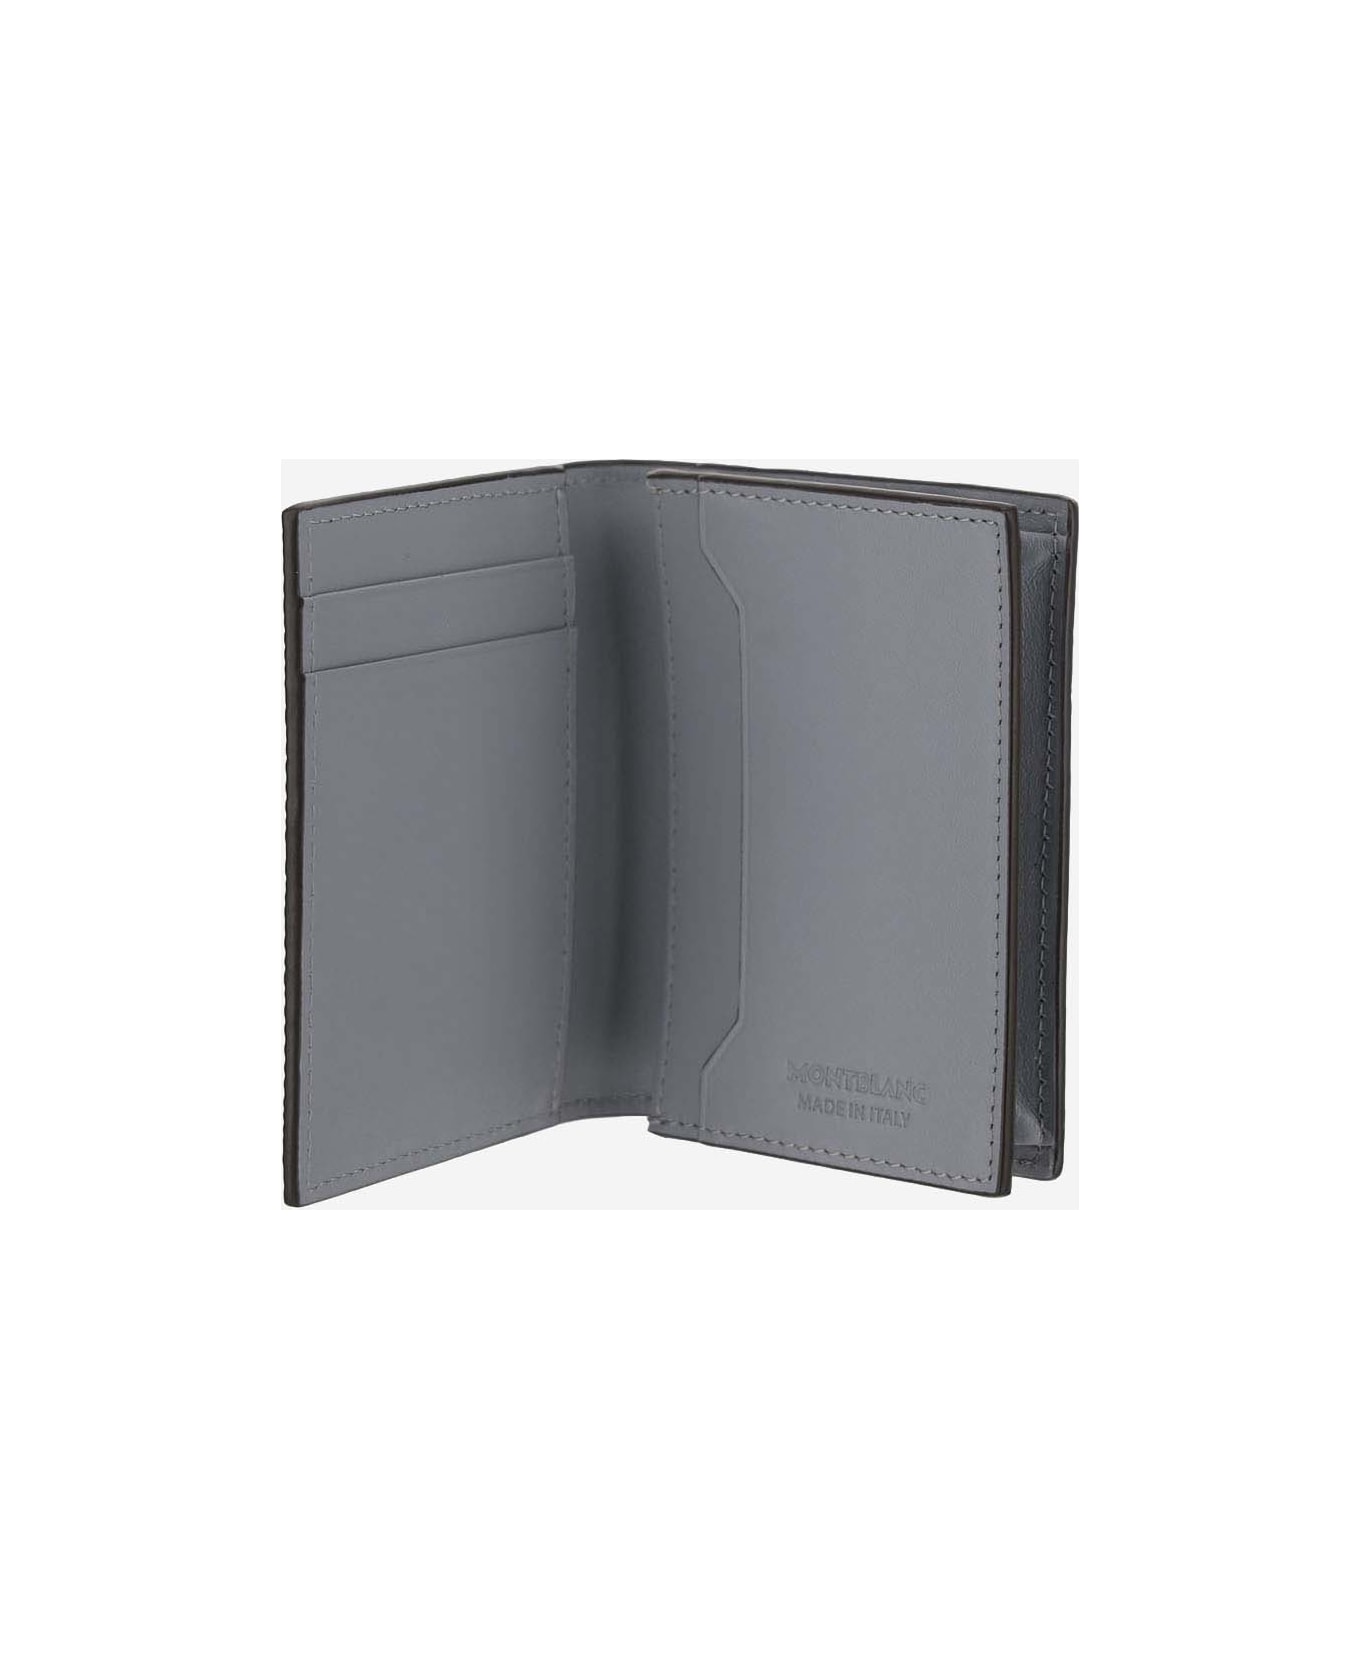 Montblanc Card Case 4 Compartments 4810 - STEEL